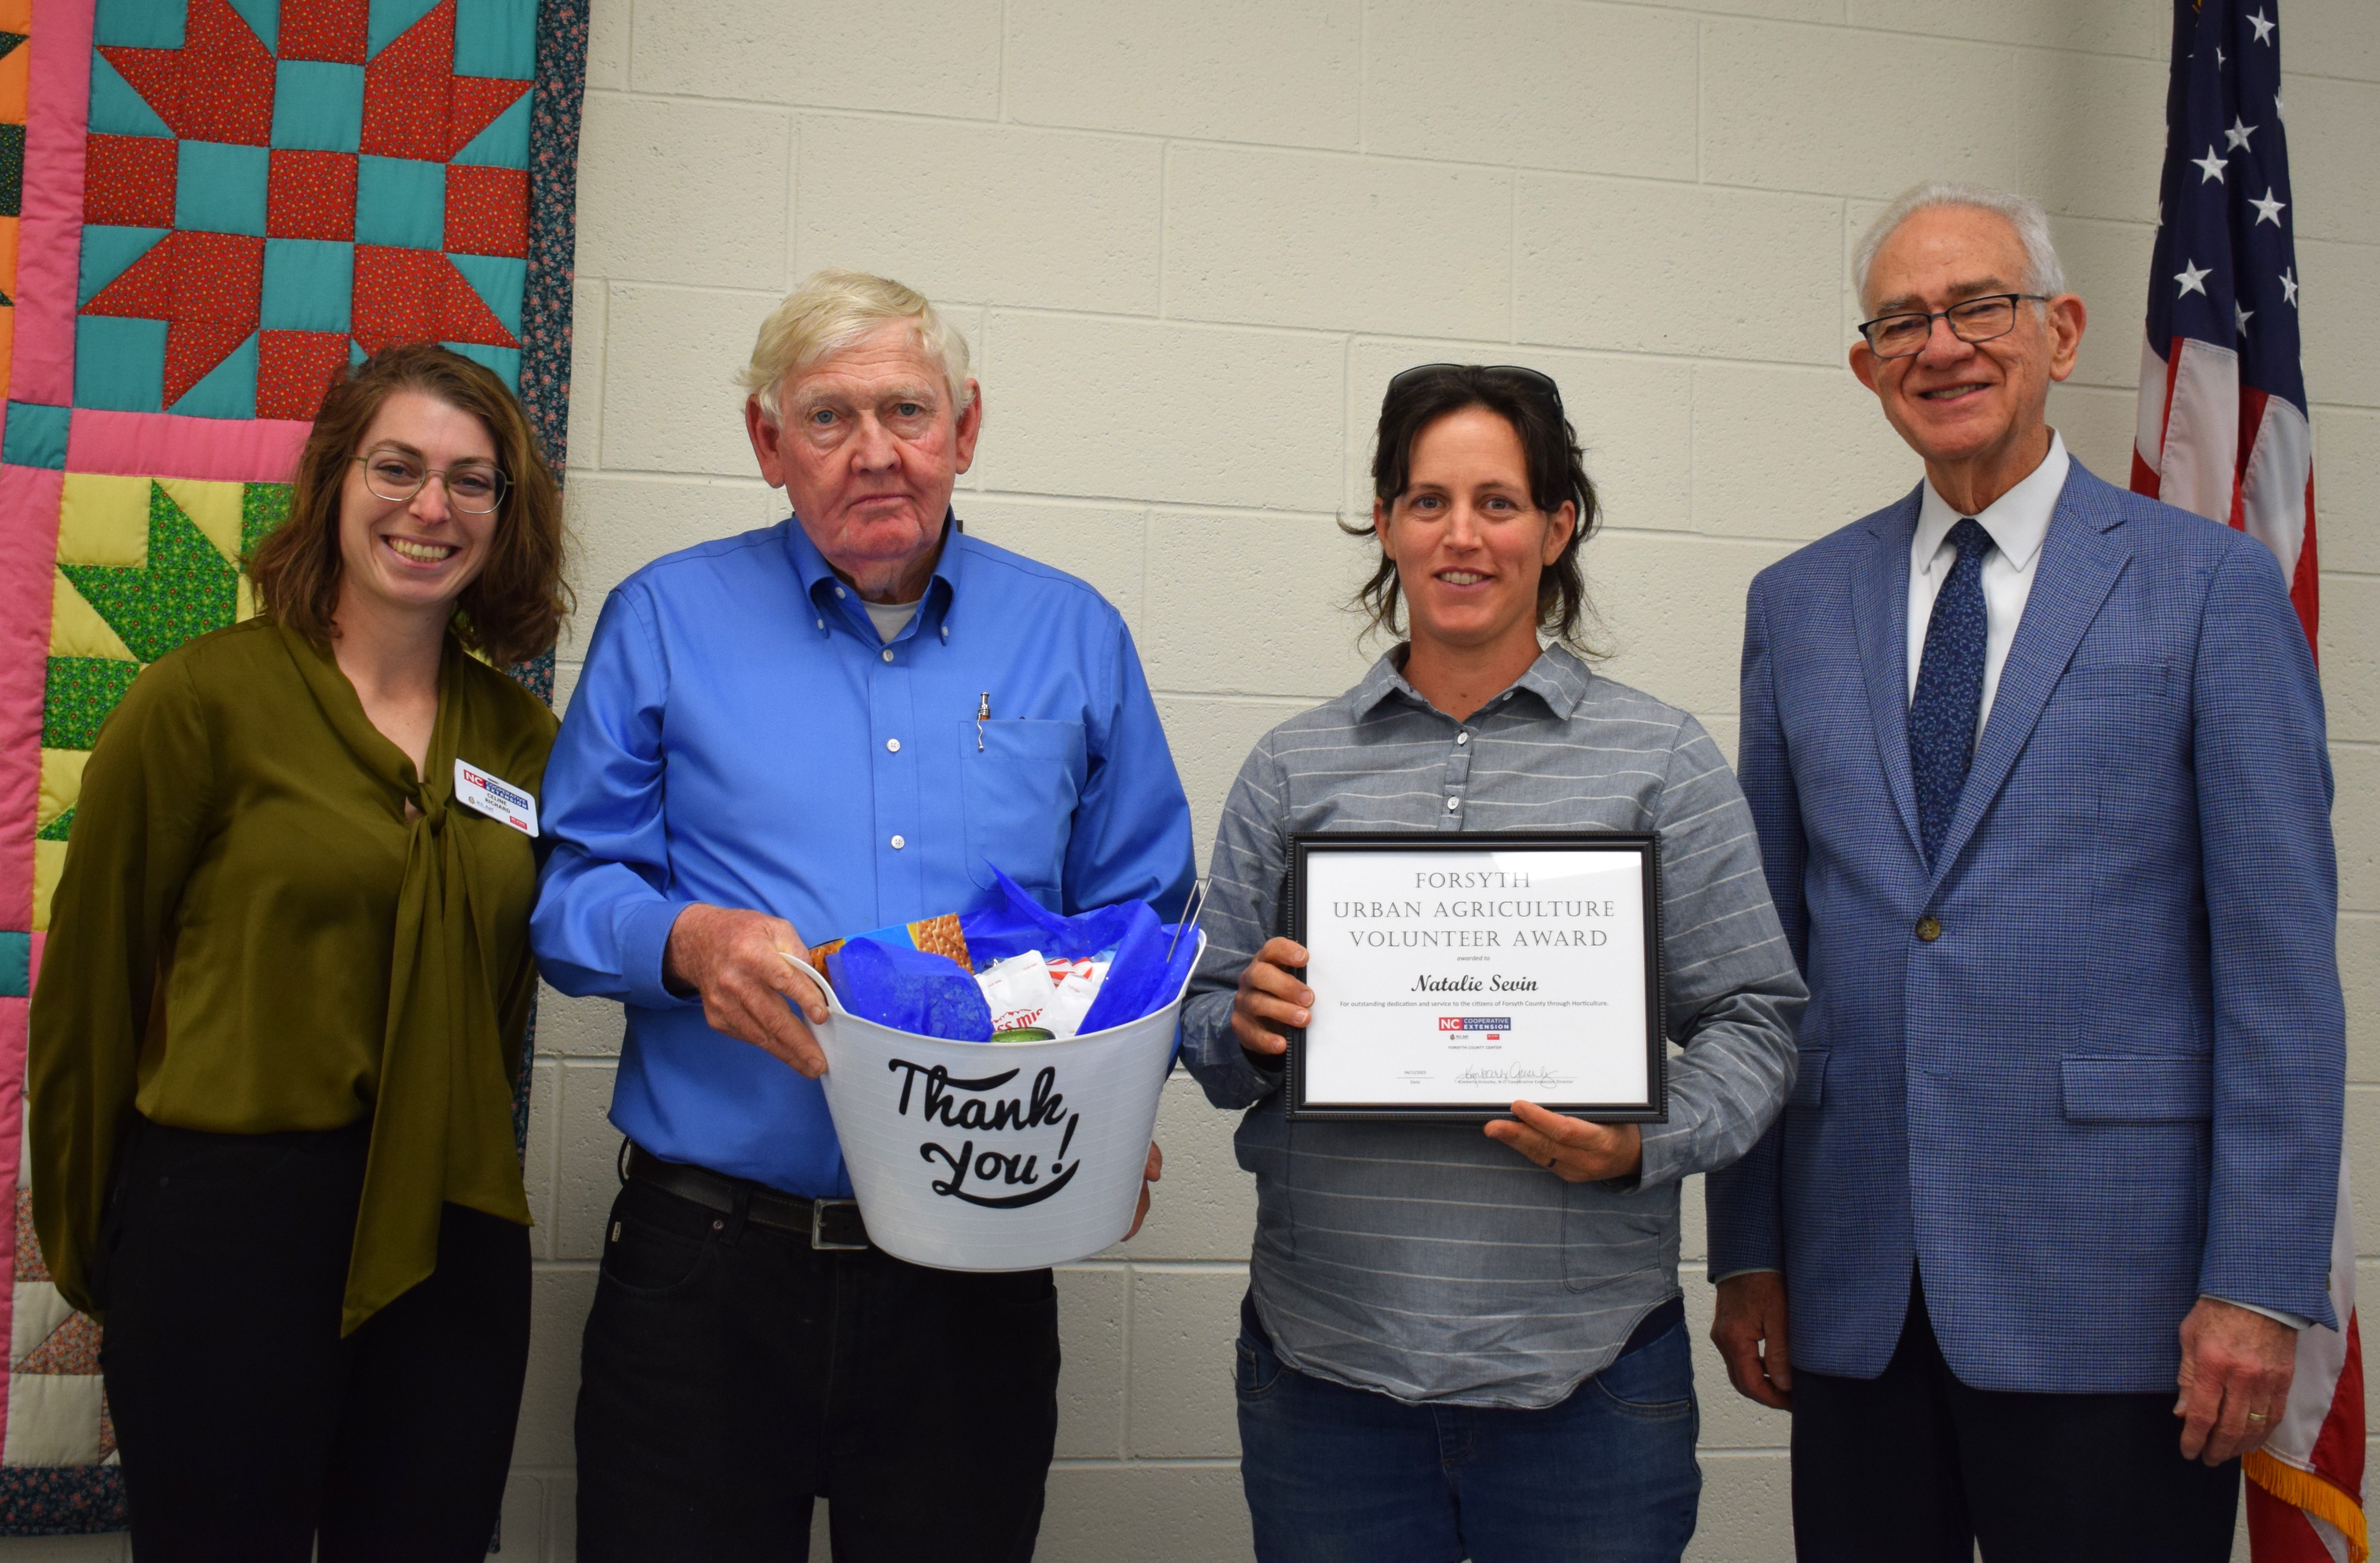 Urban Agriculture Volunteer Award, Natalie Sevin, with Horticulture Agent, Celine Richard, and Forsyth County Commissioners Richard Linville and Dr. Don Martin